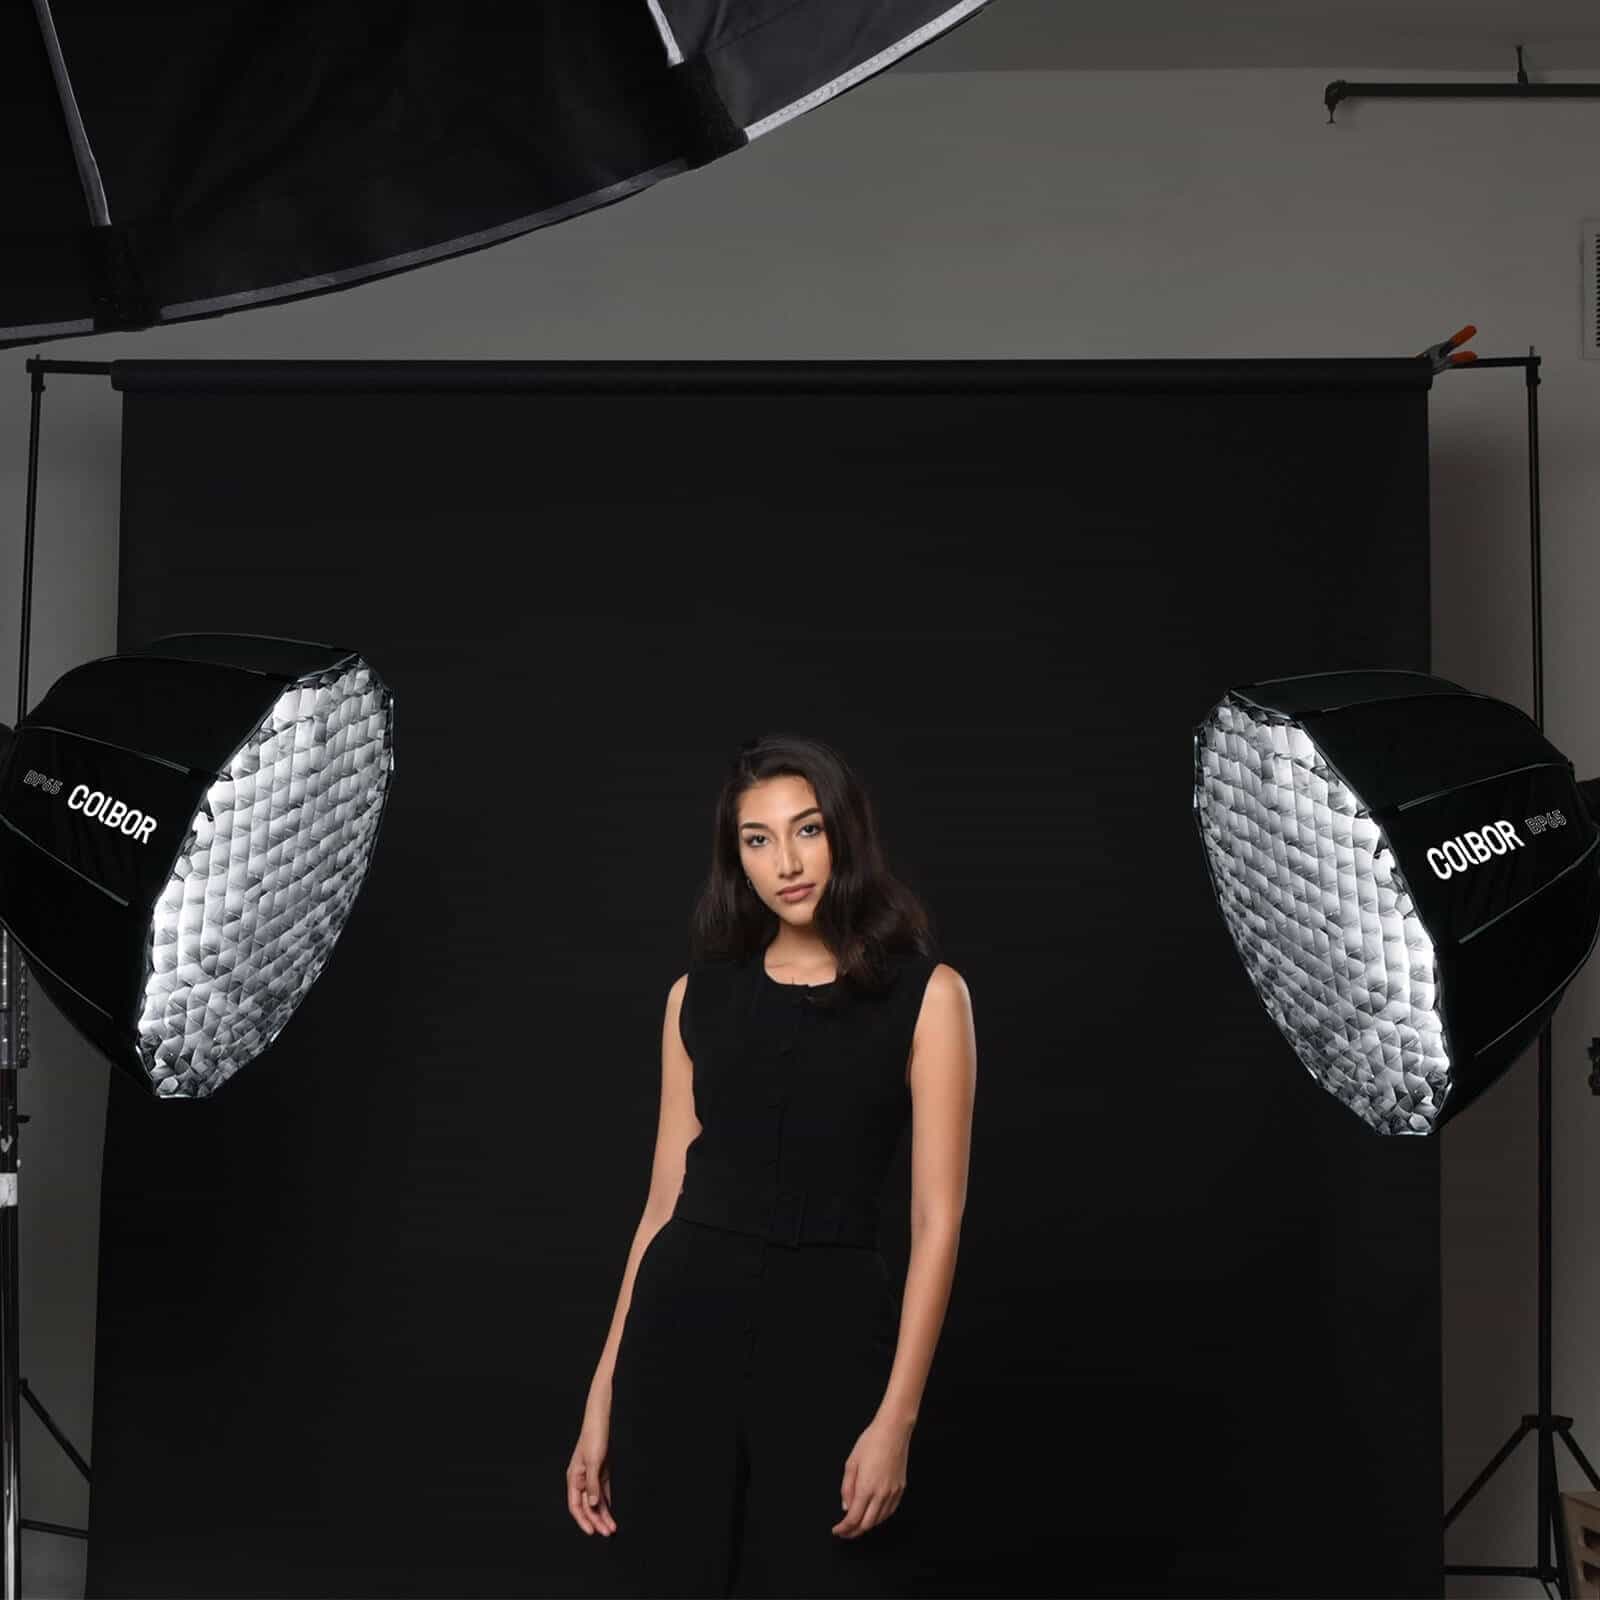 COLBOR BP65 can be used in the studio portrait lighting setup.